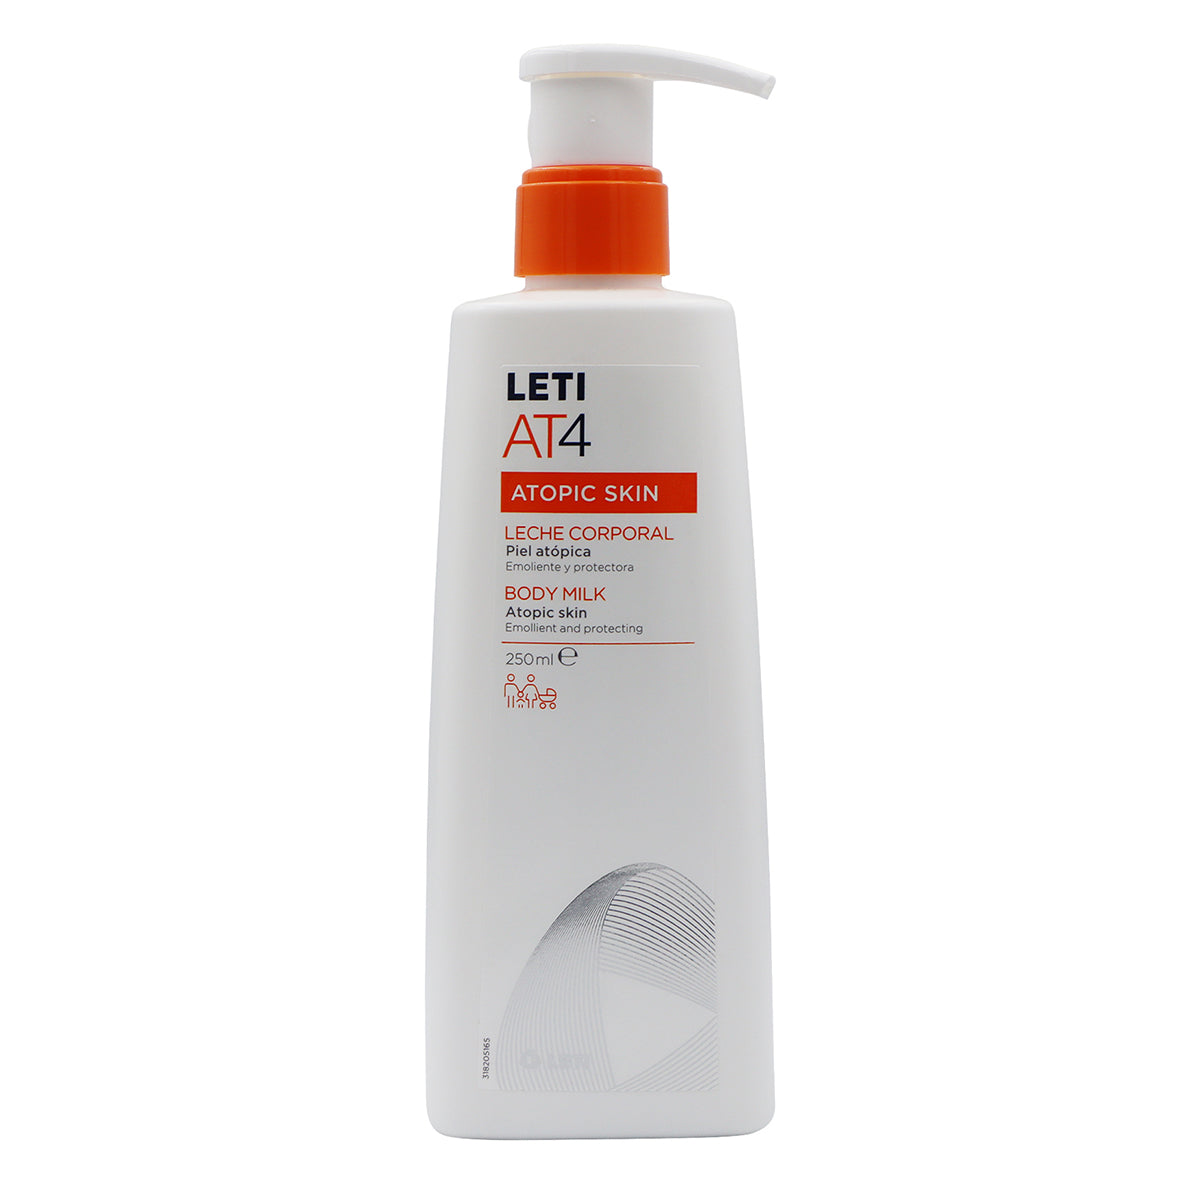 ARMSTRONG LETI AT4 LECHE CORPORAL C/250 ML